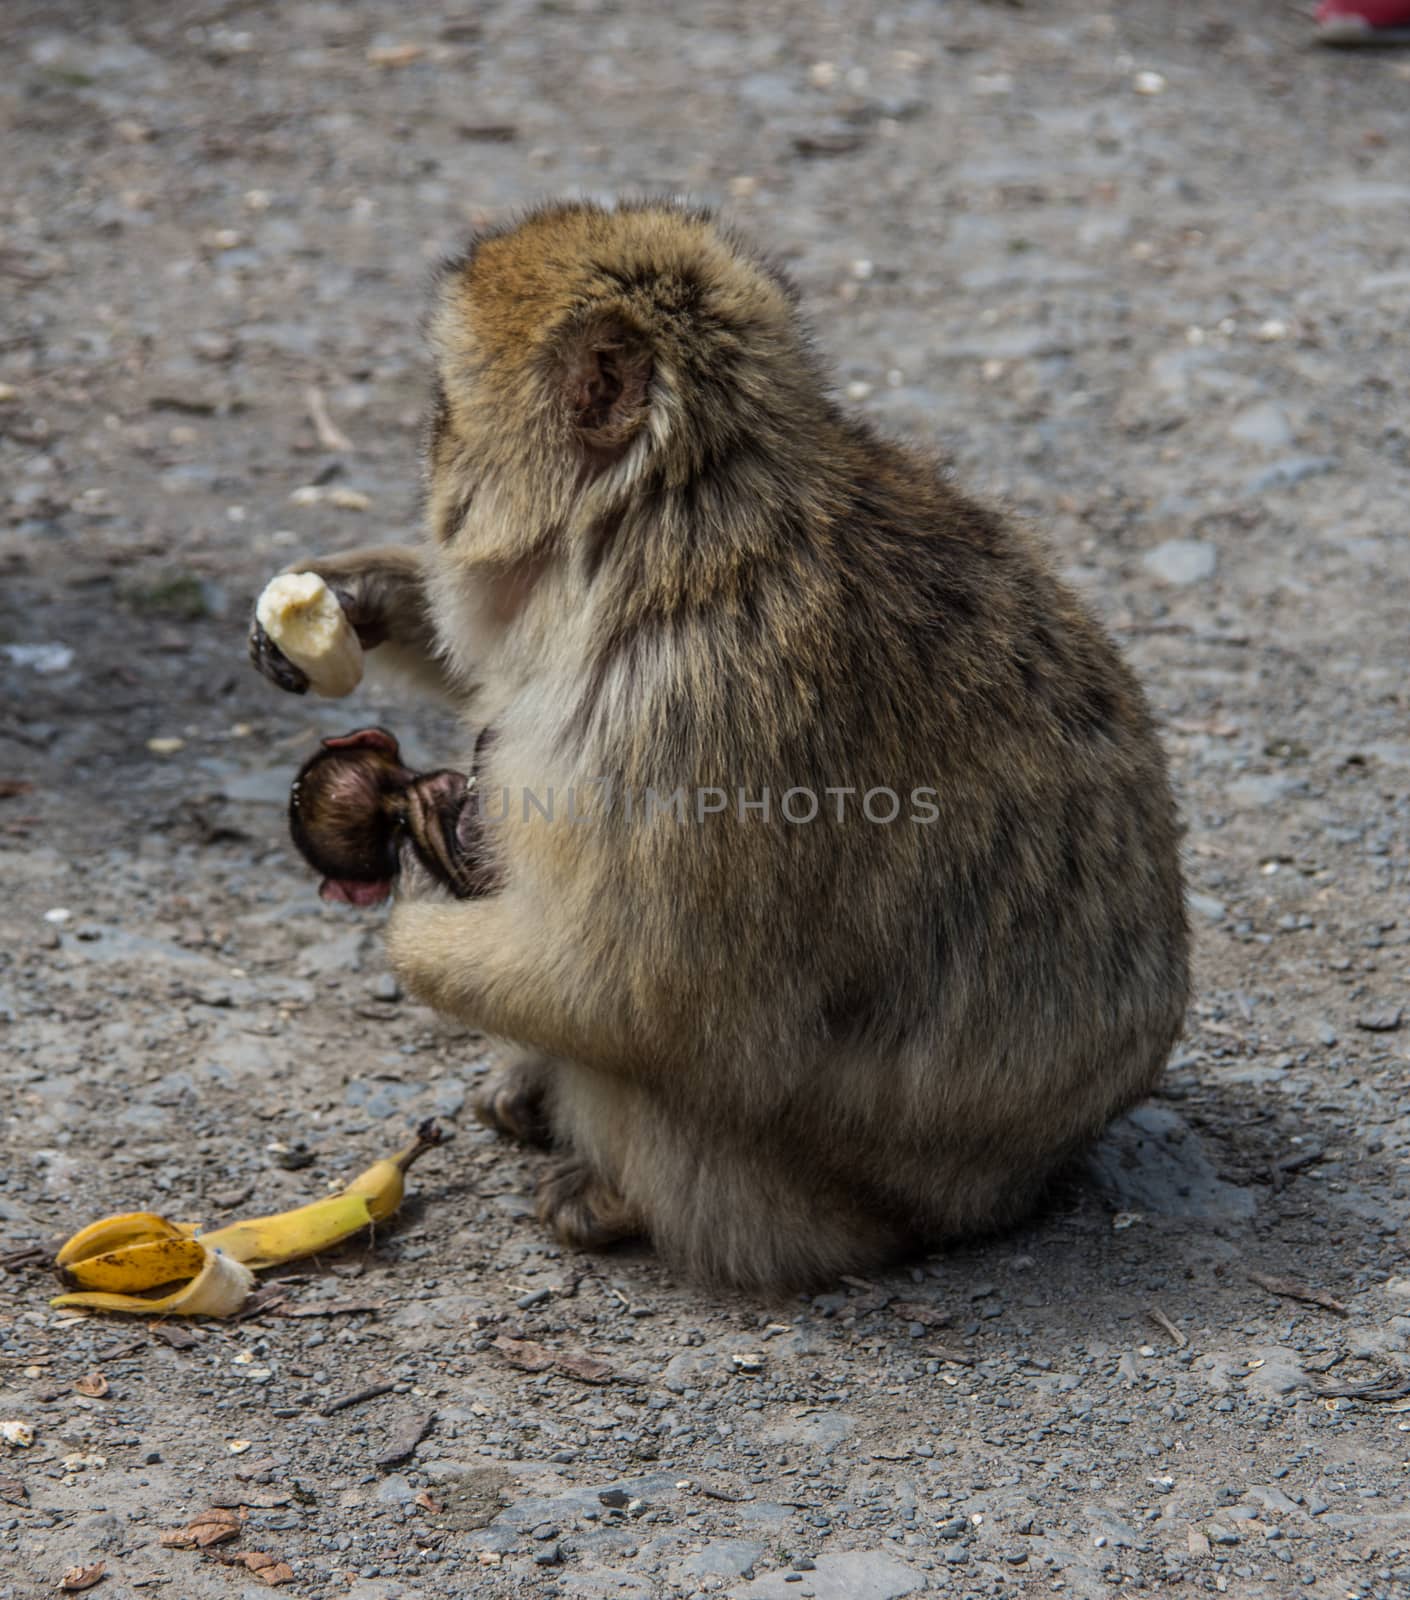 Berber monkey with cub in her arms